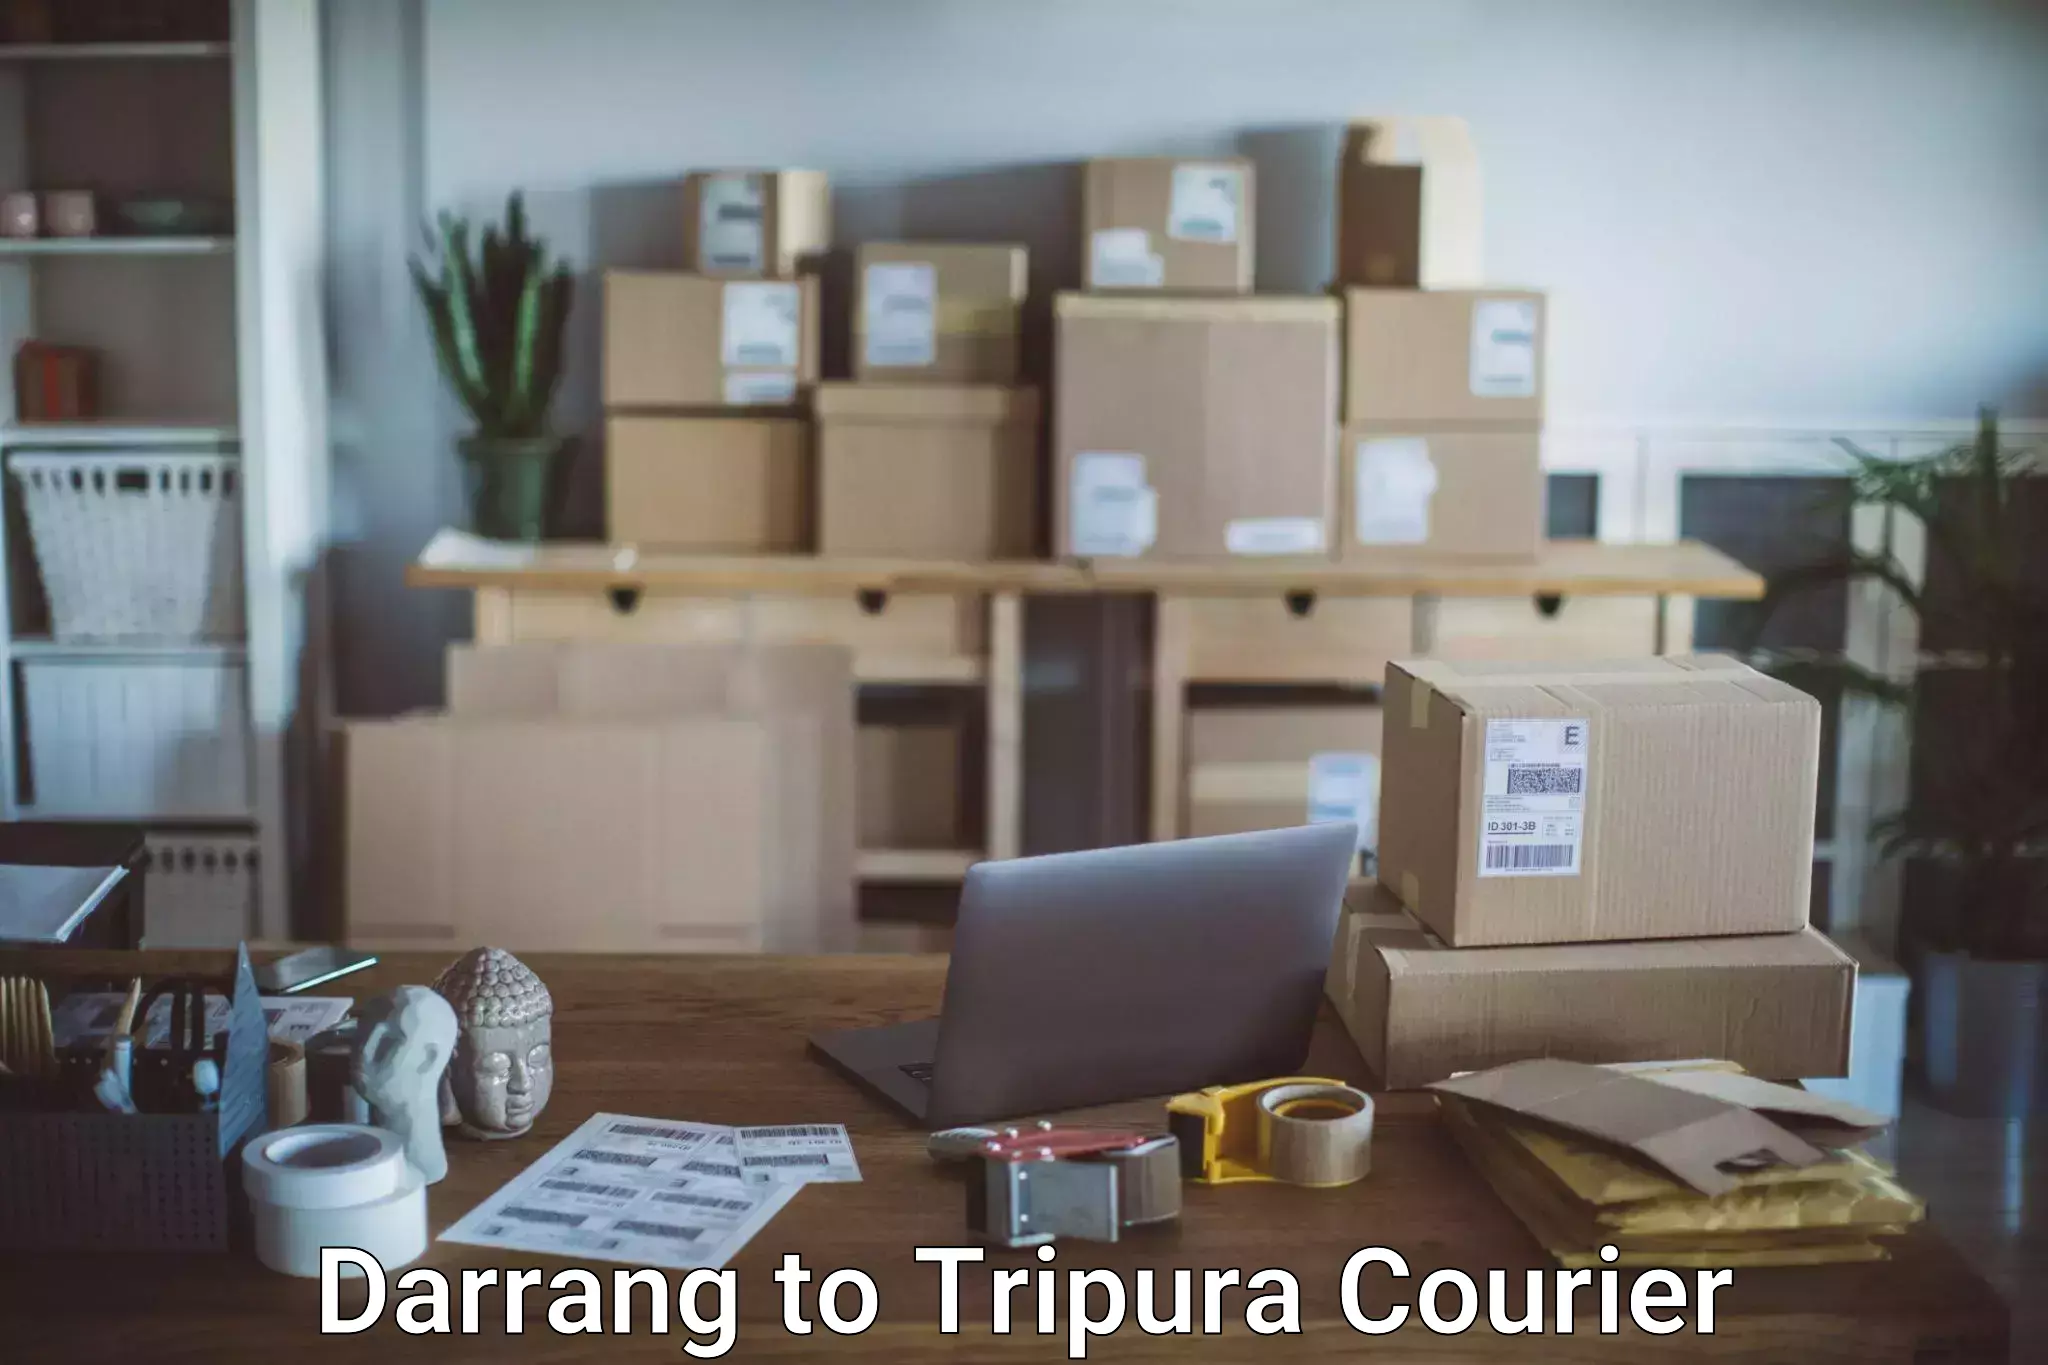 Personal effects shipping Darrang to Udaipur Tripura